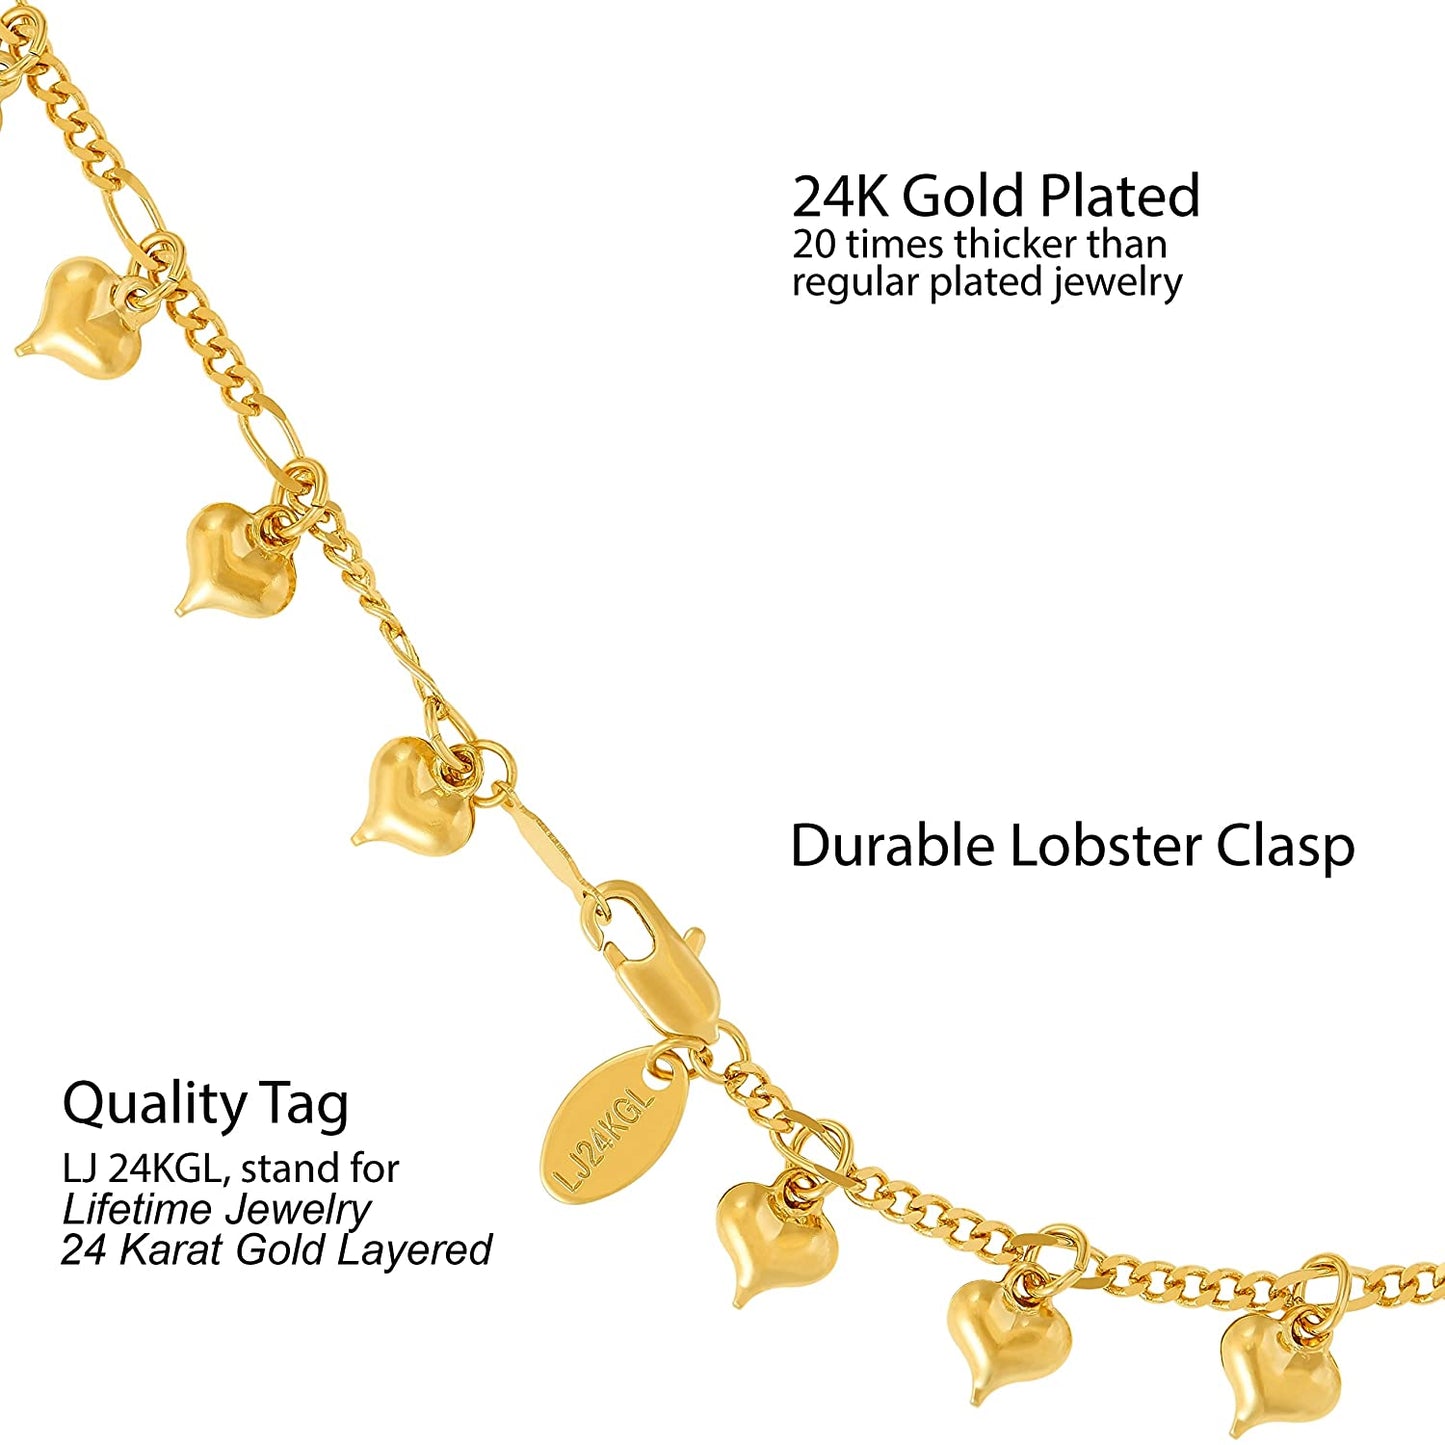 LIFETIME JEWELRY Dangling Hearts Anklet for Women & Teen Girls 24k Gold Plated - (For 6 piece(s))